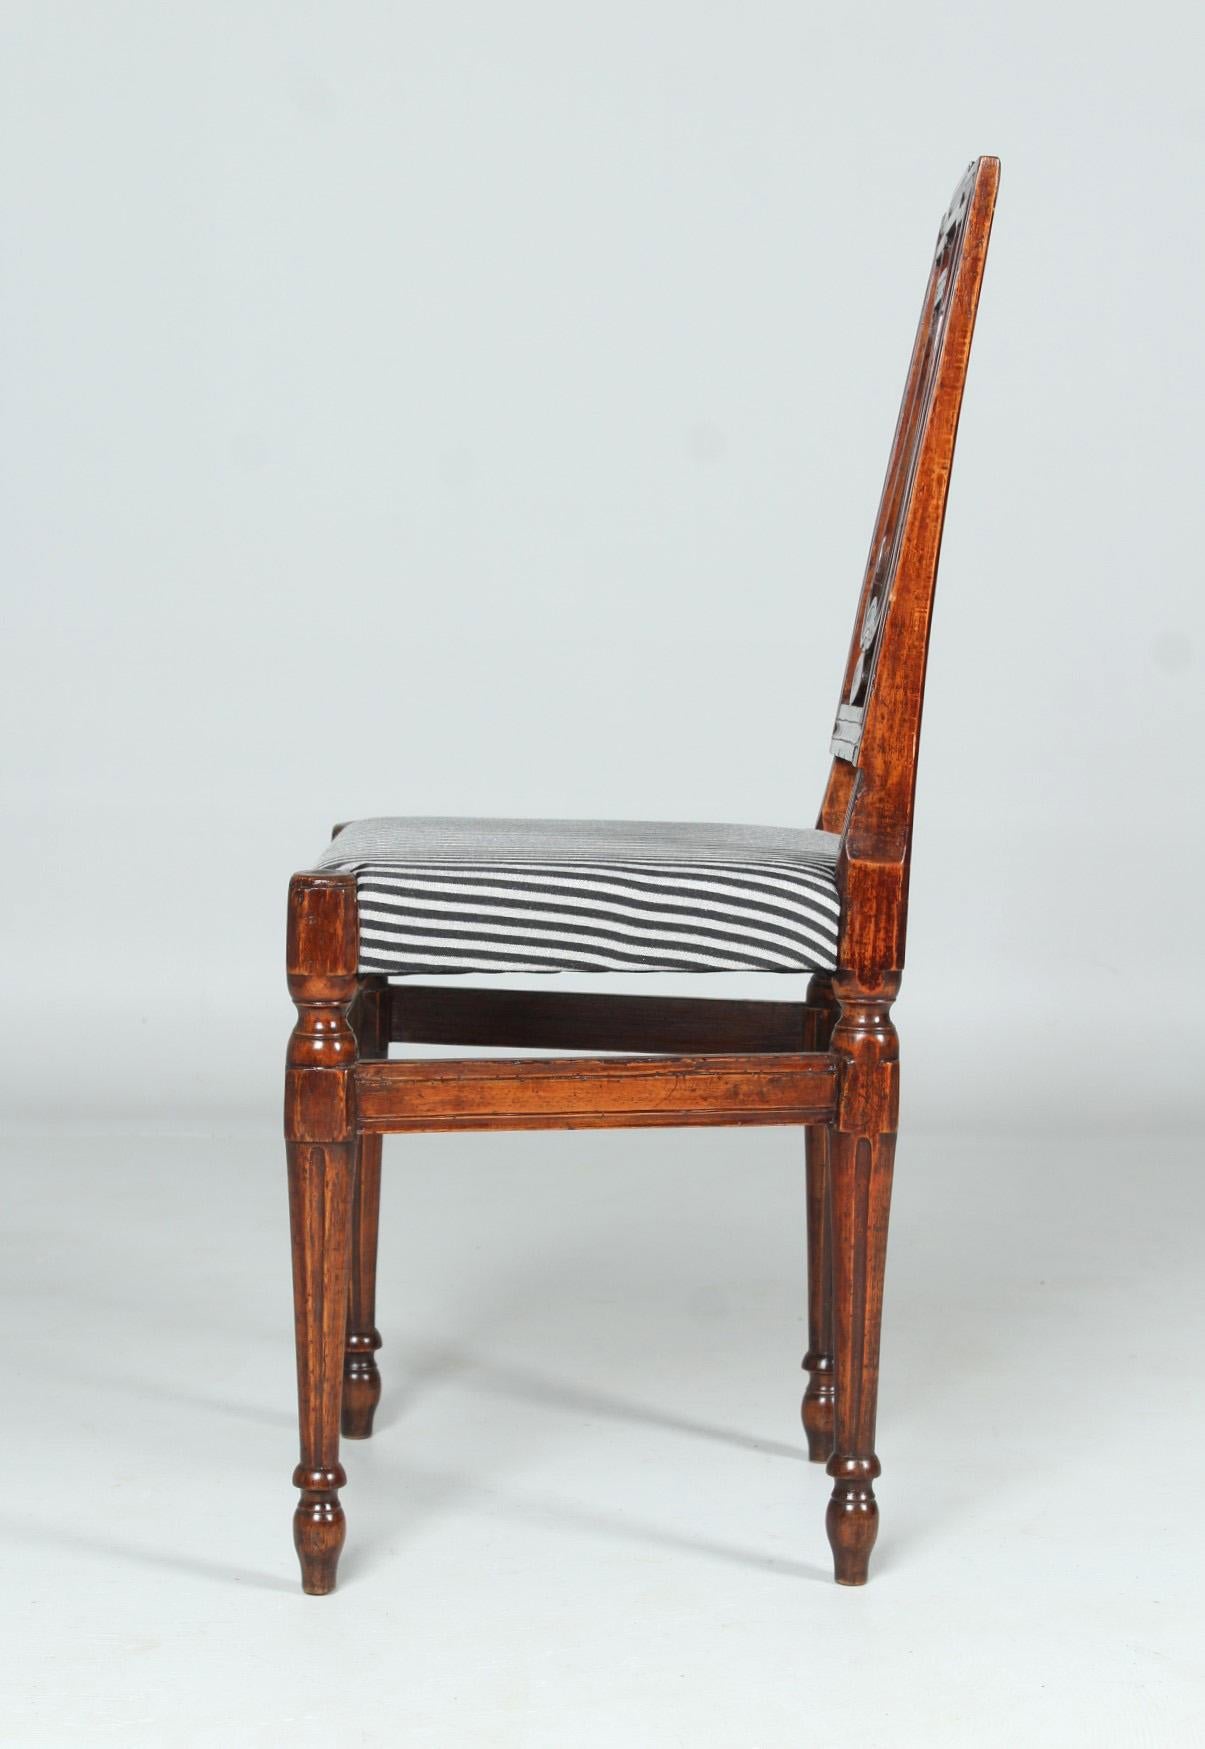 Beautiful antique chair with lyre motif in the back board. The chair is made of solid walnut and walnut stained beech.
On the back there is a signature: J. Pausch.

Signs of age and use. Completely restored and shellac polished. Newly